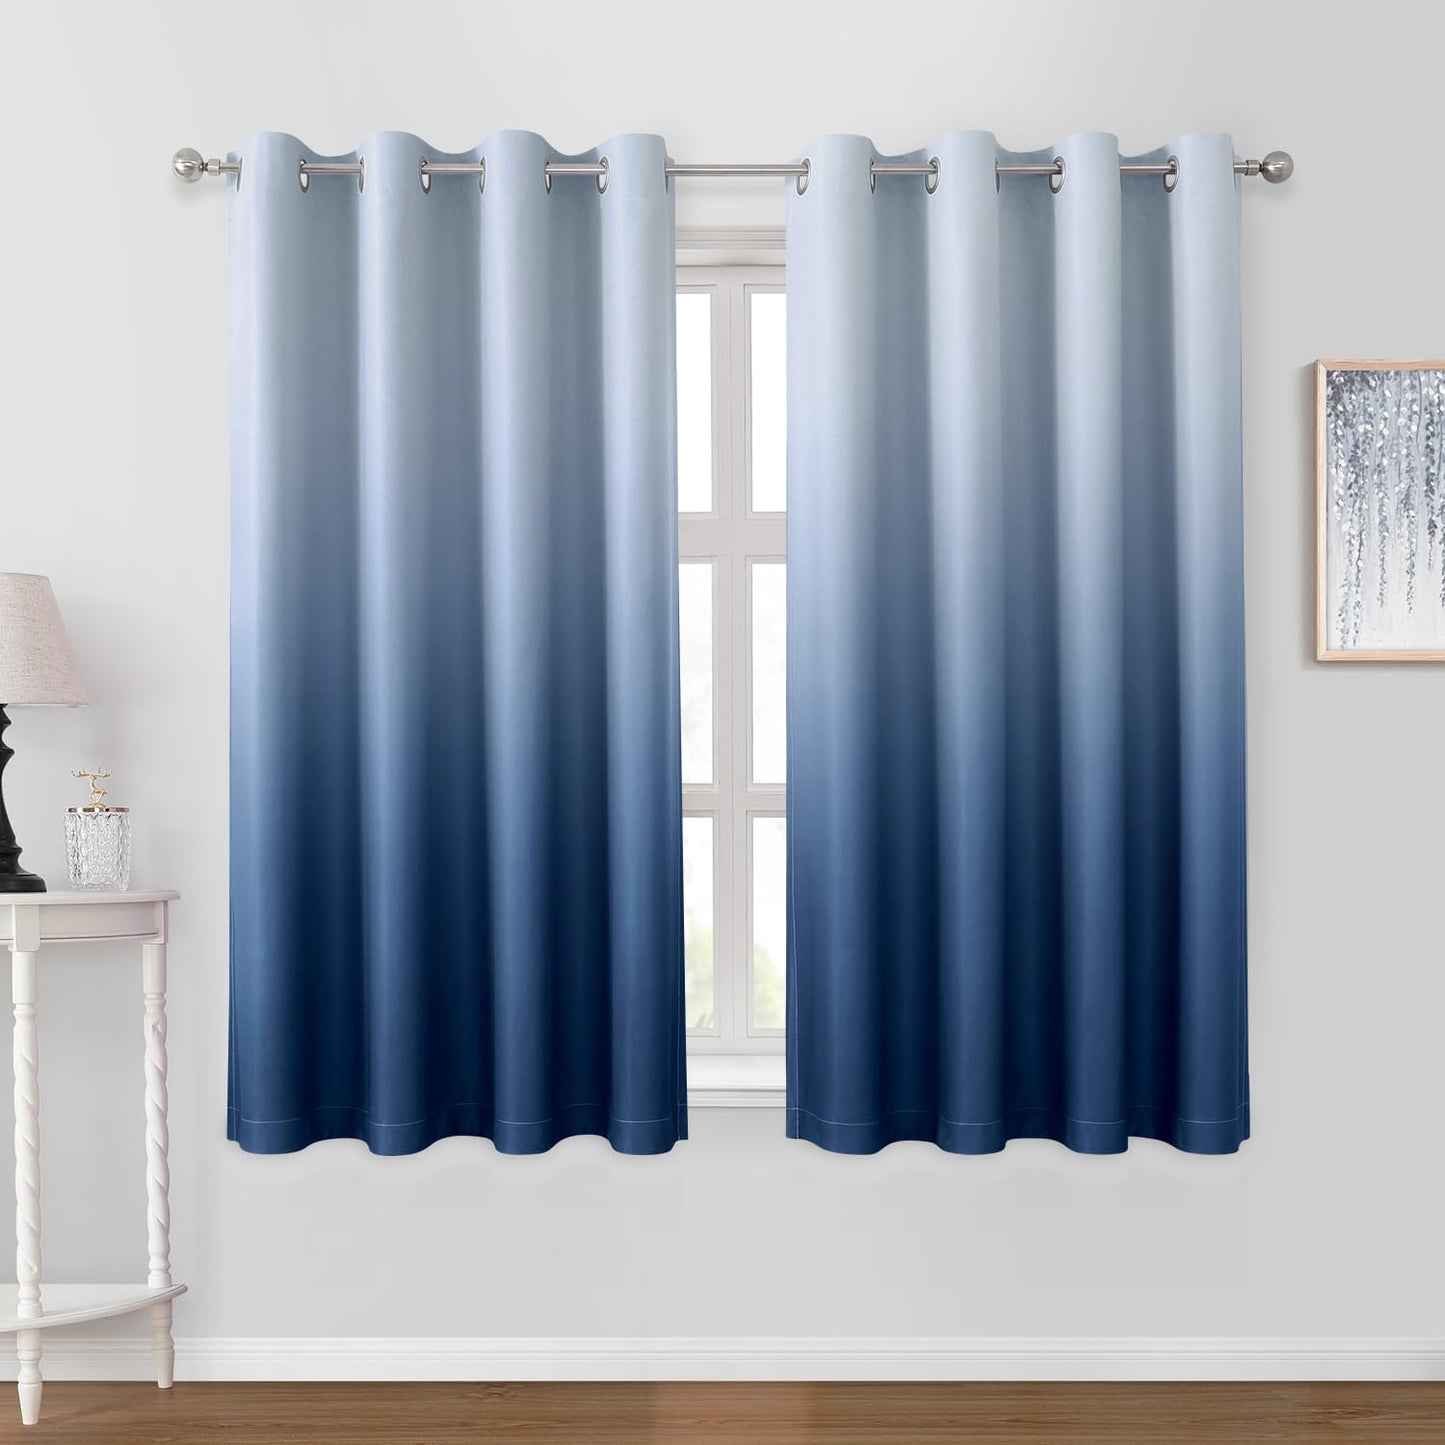 HOMEIDEAS Navy Blue Ombre Blackout Curtains 52 X 84 Inch Length Gradient Room Darkening Thermal Insulated Energy Saving Grommet 2 Panels Window Drapes for Living Room/Bedroom  HOMEIDEAS Navy Blue 52"W X 63"L 